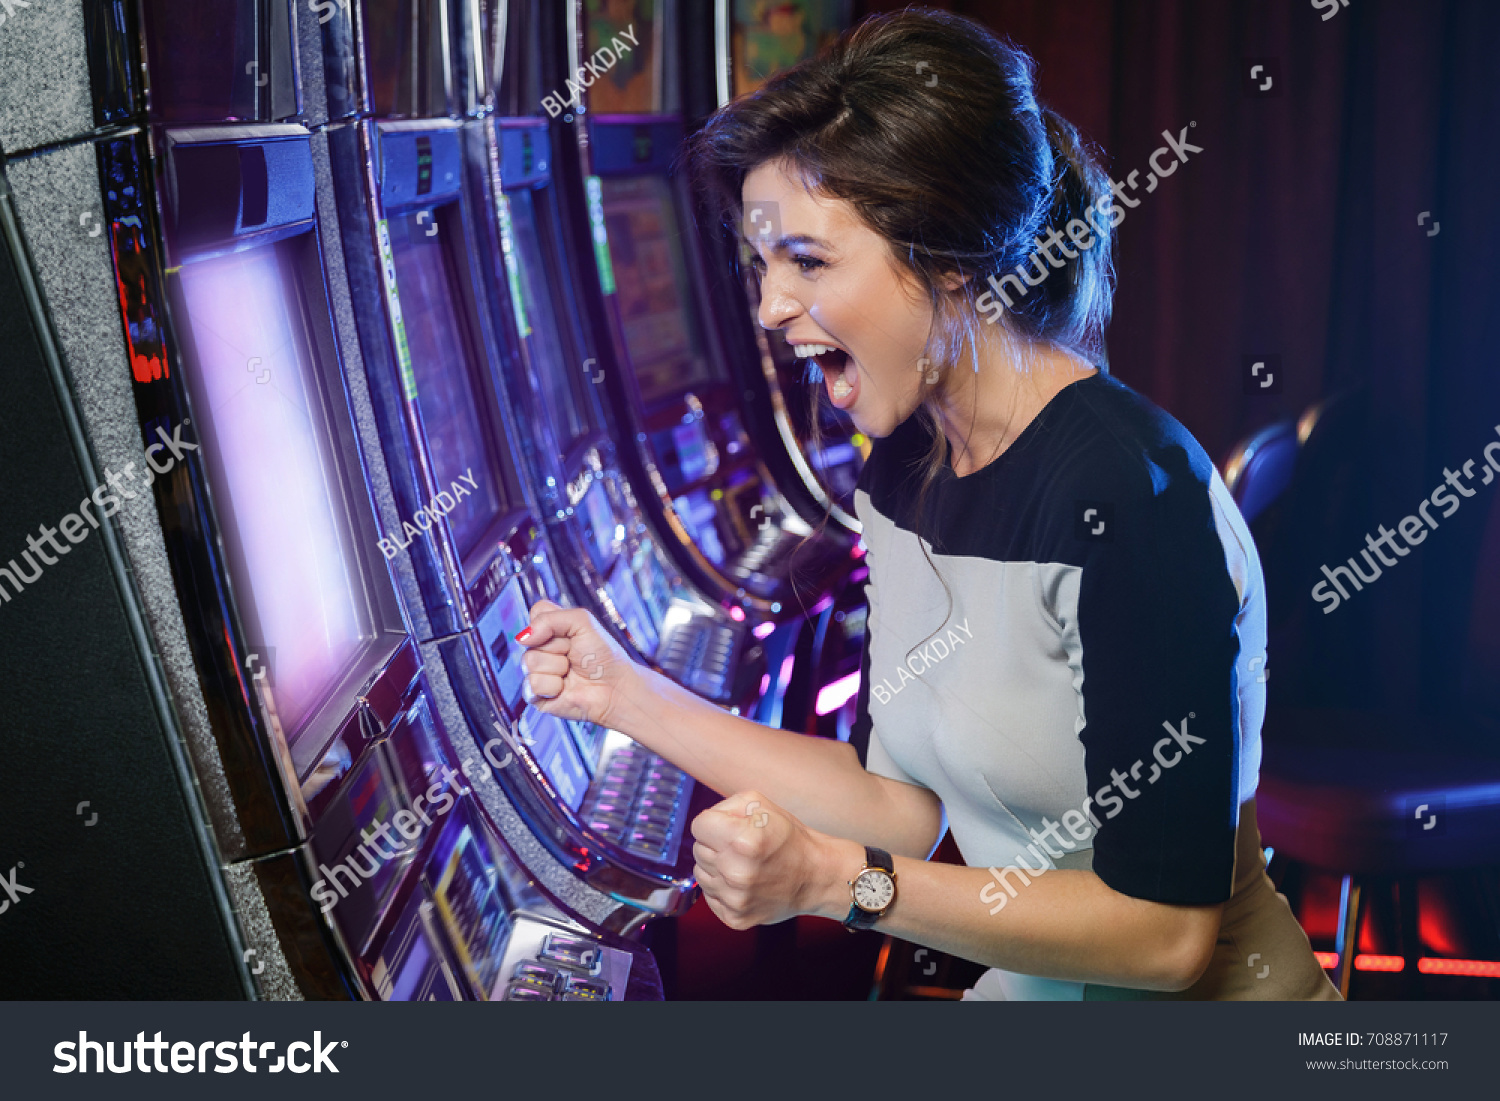 Happy woman playing slot machines in the casino #708871117